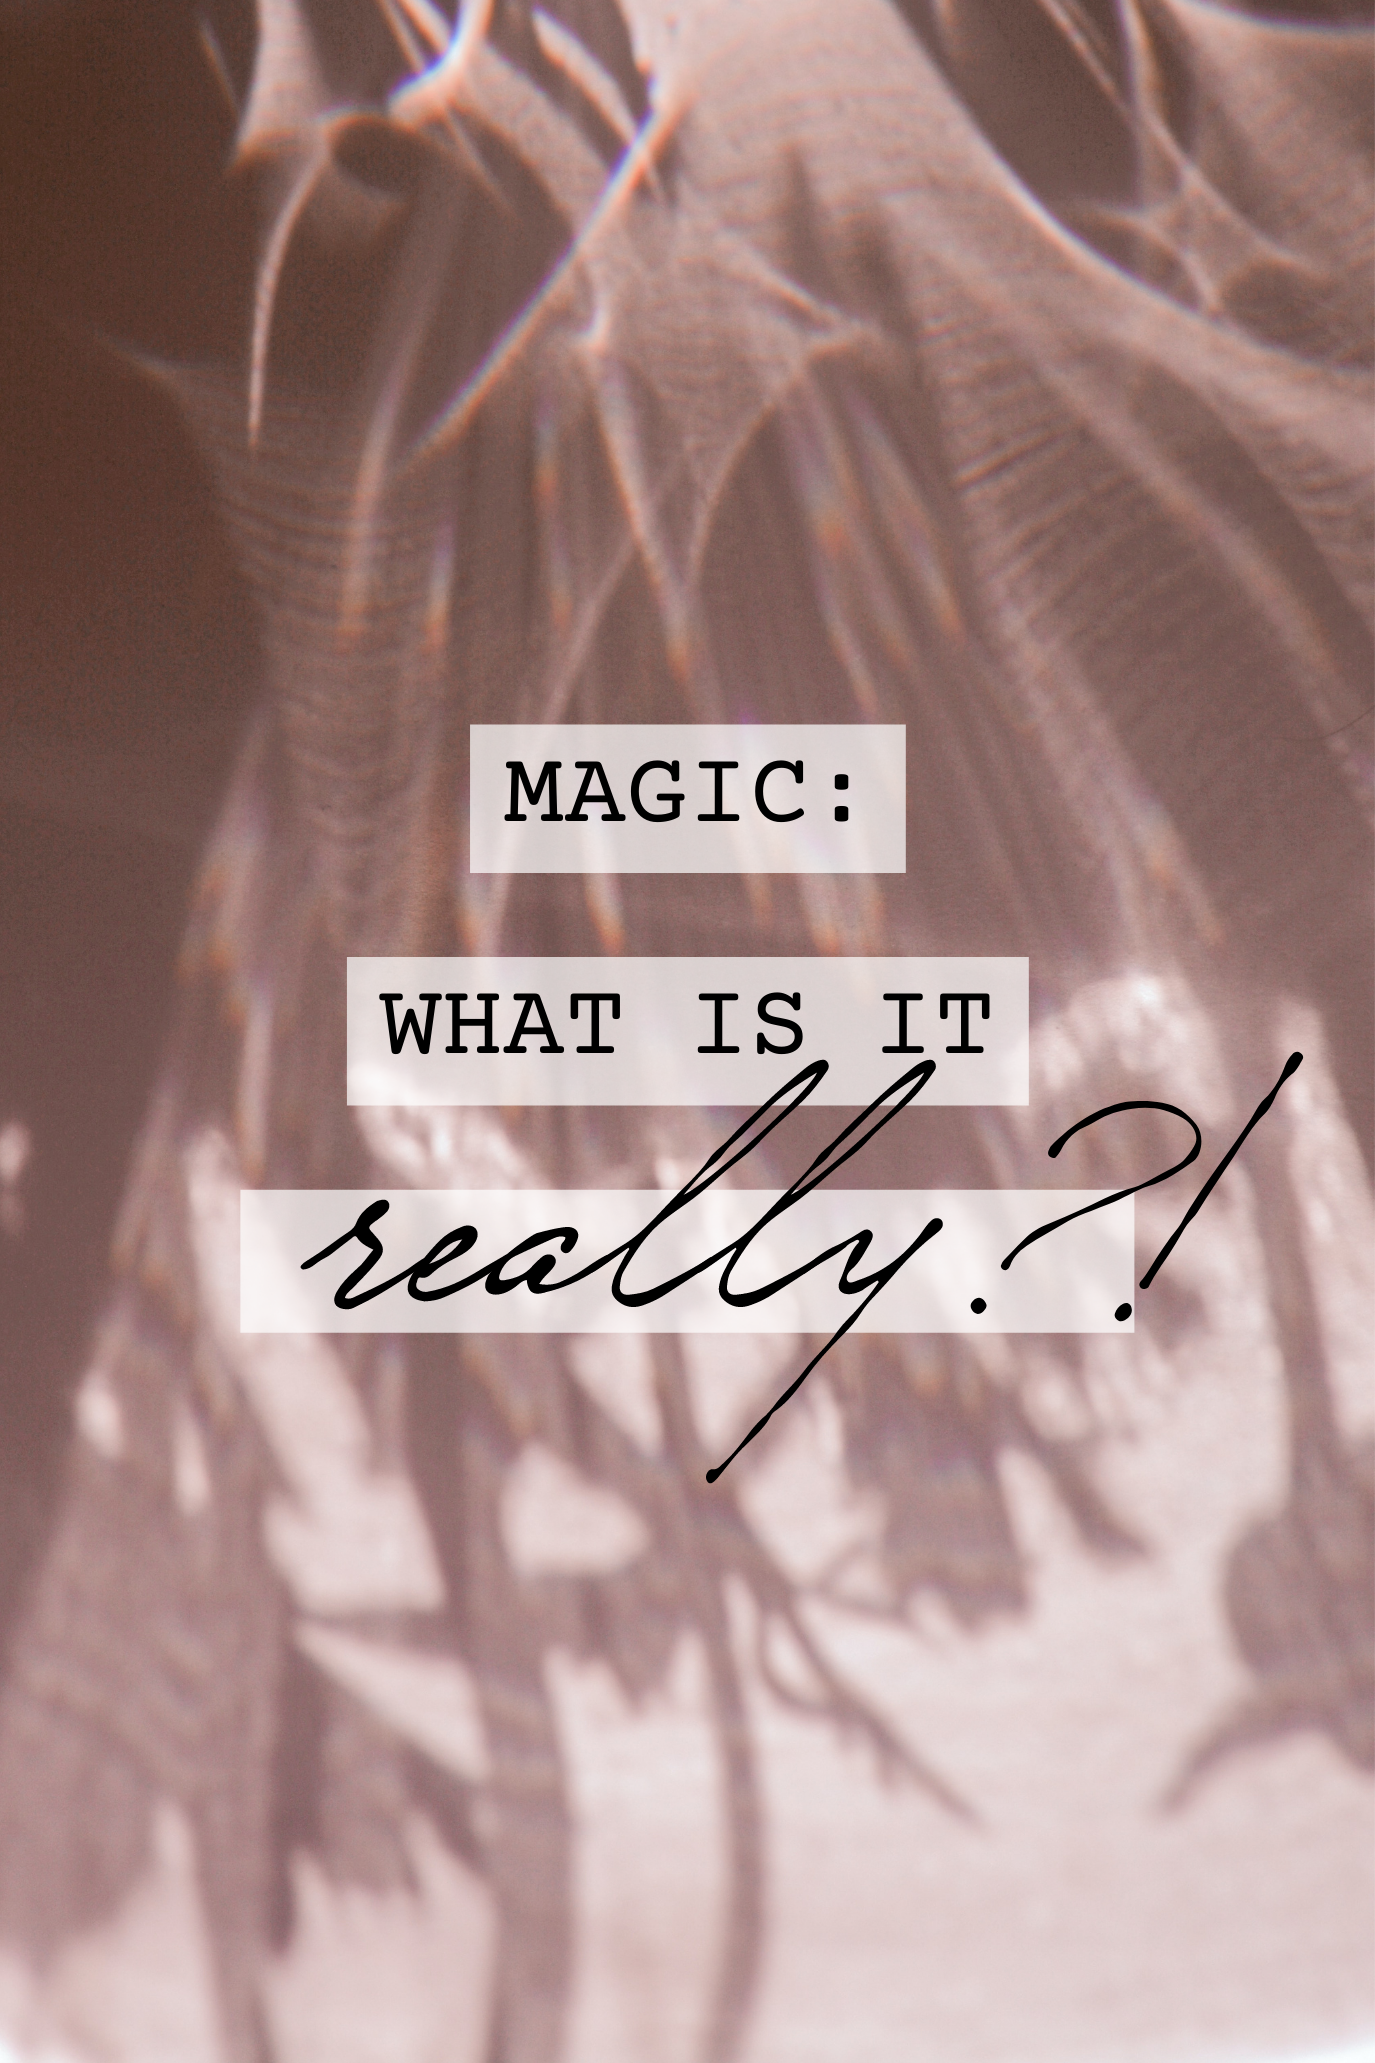 Magic: What Is It, Really?! Podcast with Tabitha Stitt, The Self-Help Psychic, professional psychic medium and spiritual teacher